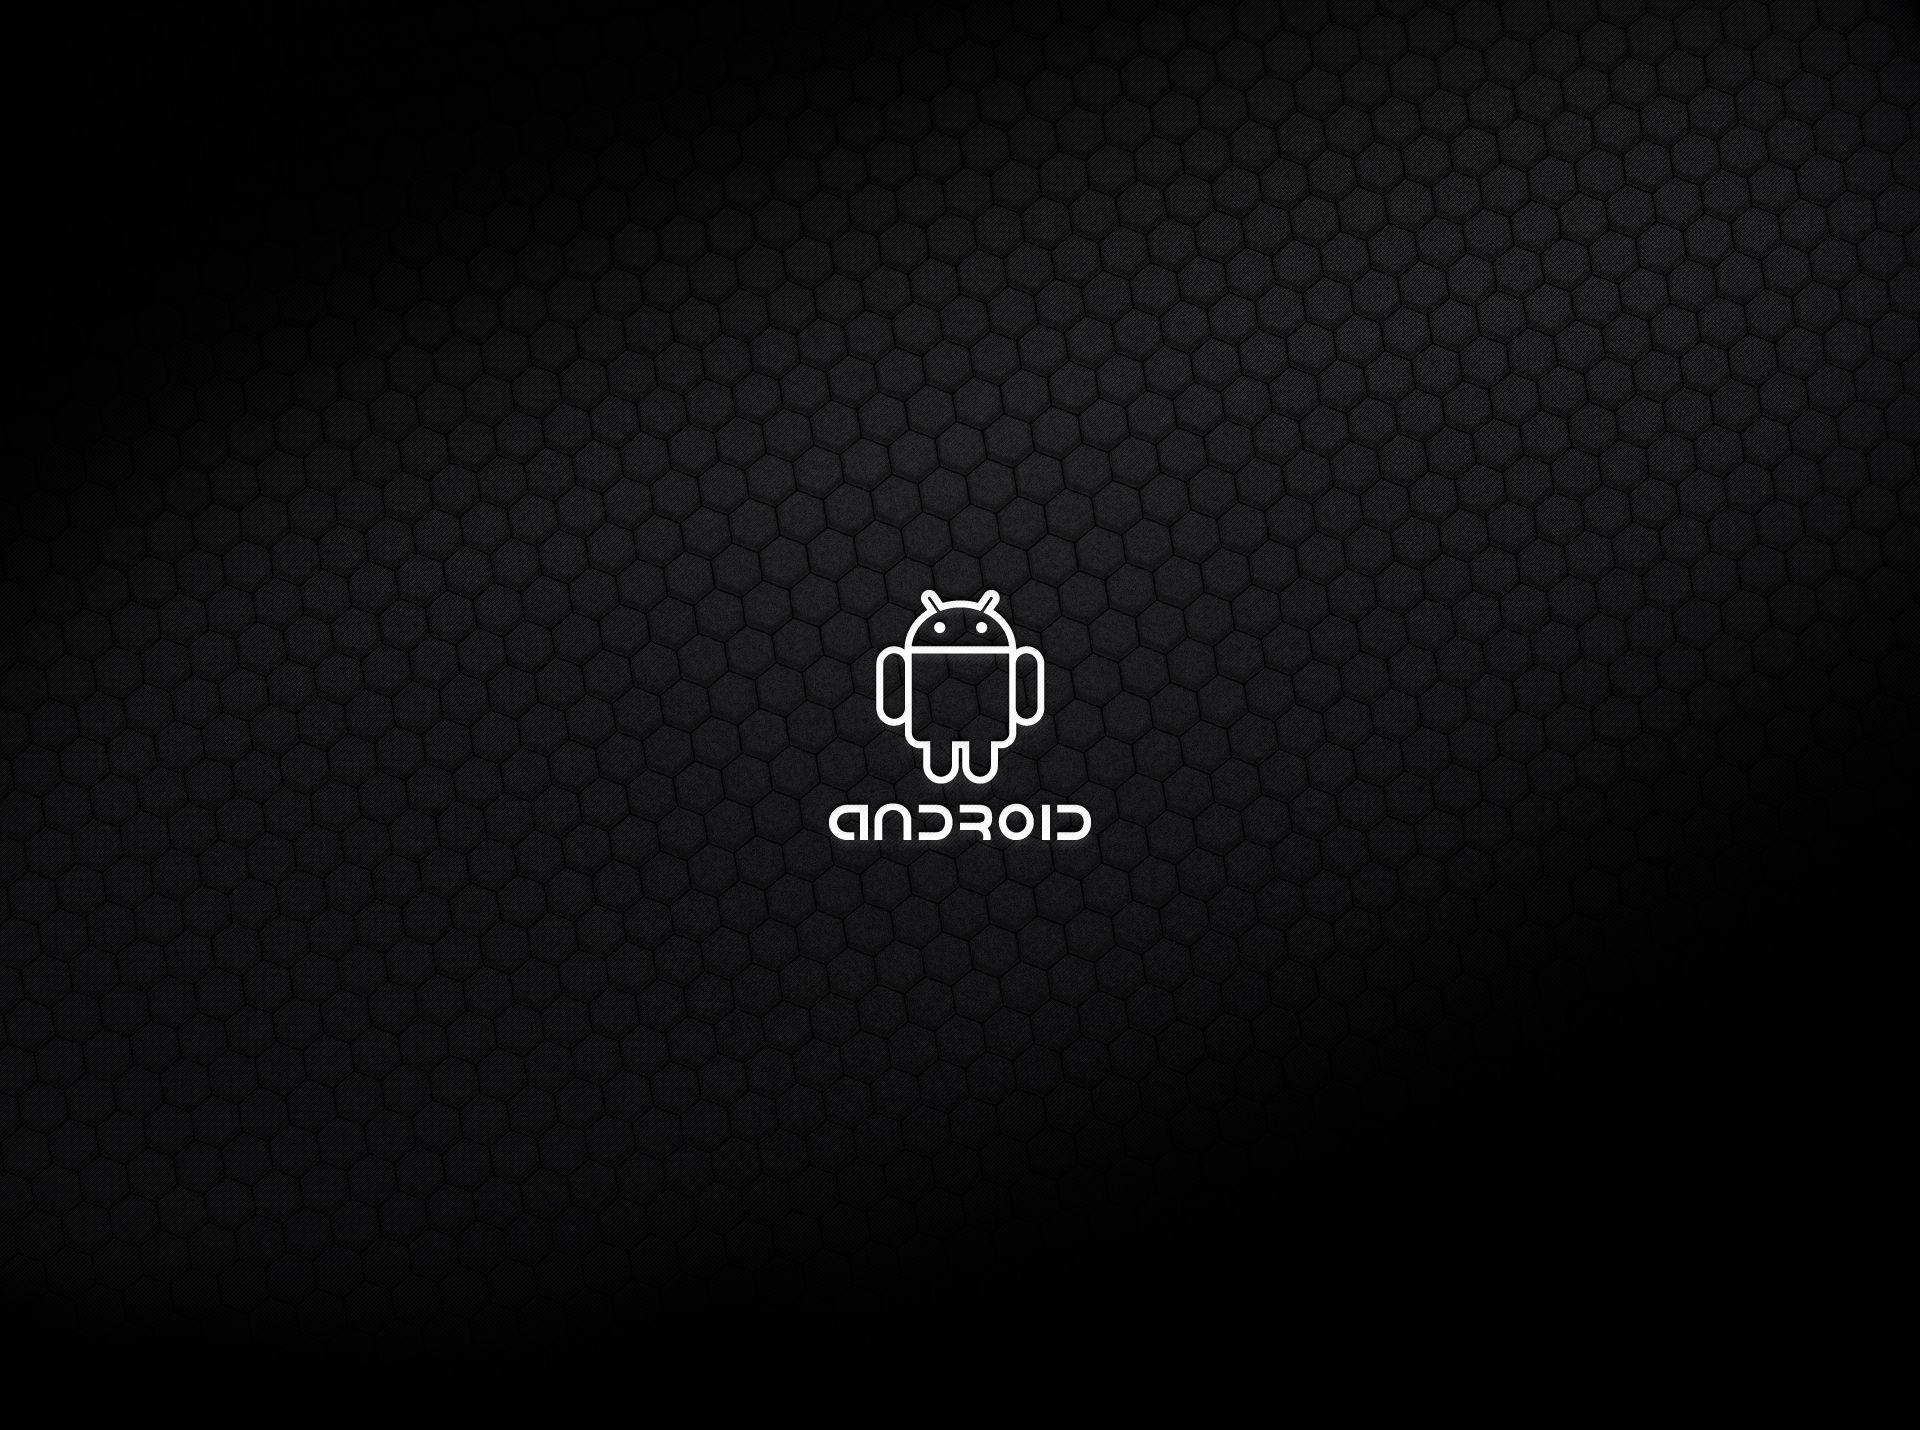 Android Logo Wallpaper HD Image Download